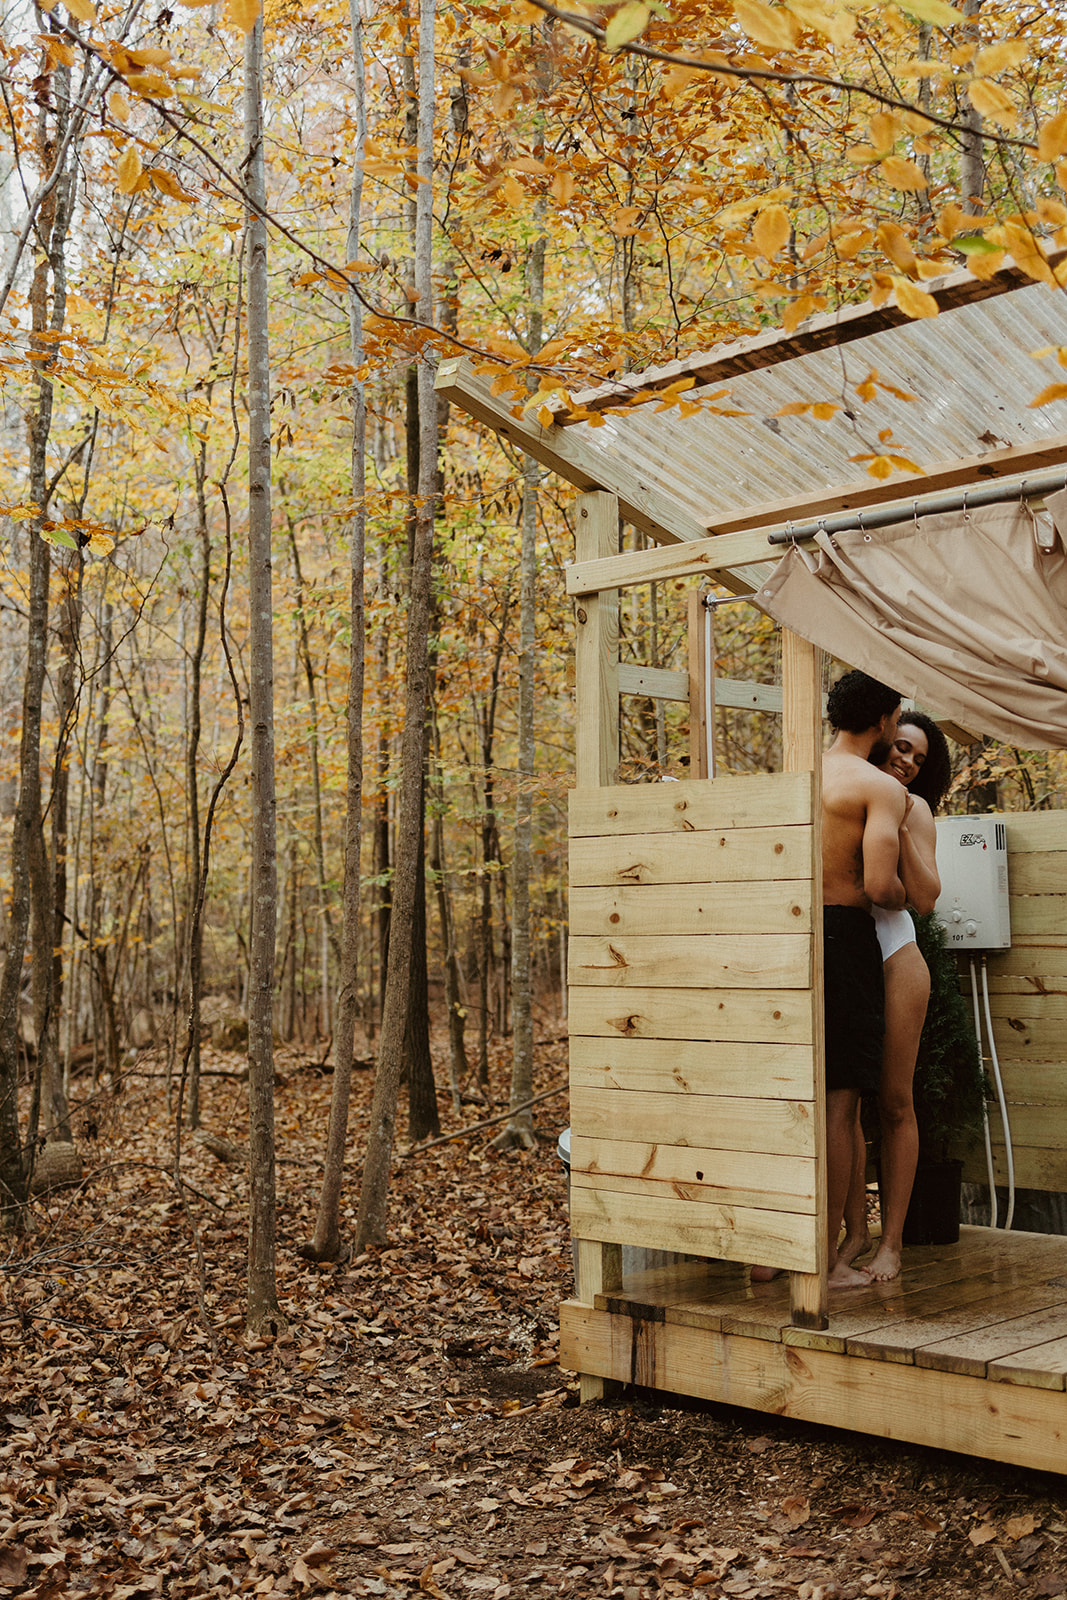 the couple hanging out in the airbnb outdoor shower